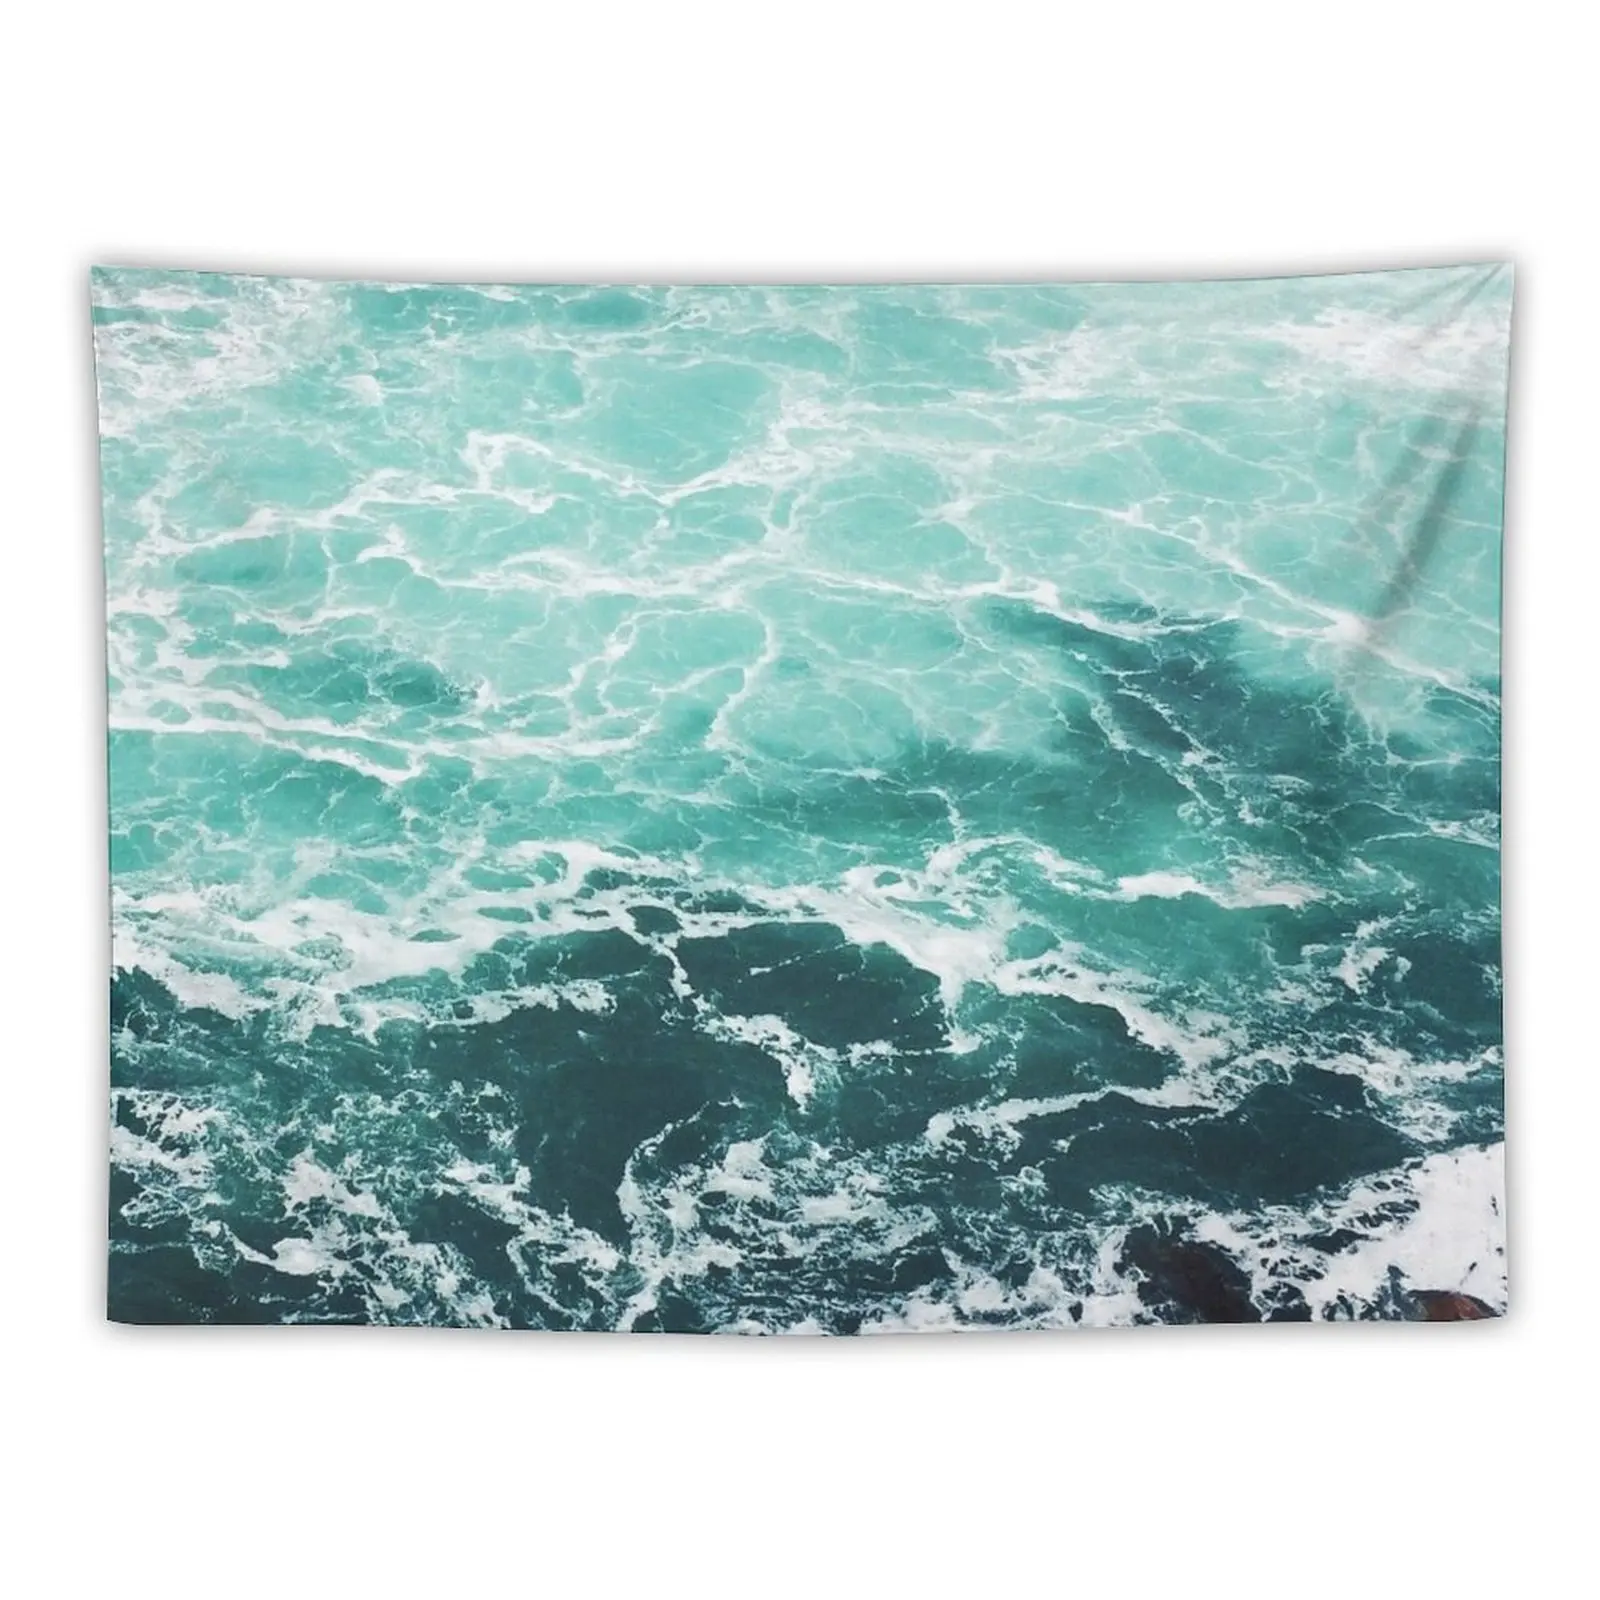 

Blue Ocean Summer Beach Waves Tapestry Room Decor Cute Decor For Room Wallpapers Home Decor Home Decorations Tapestry